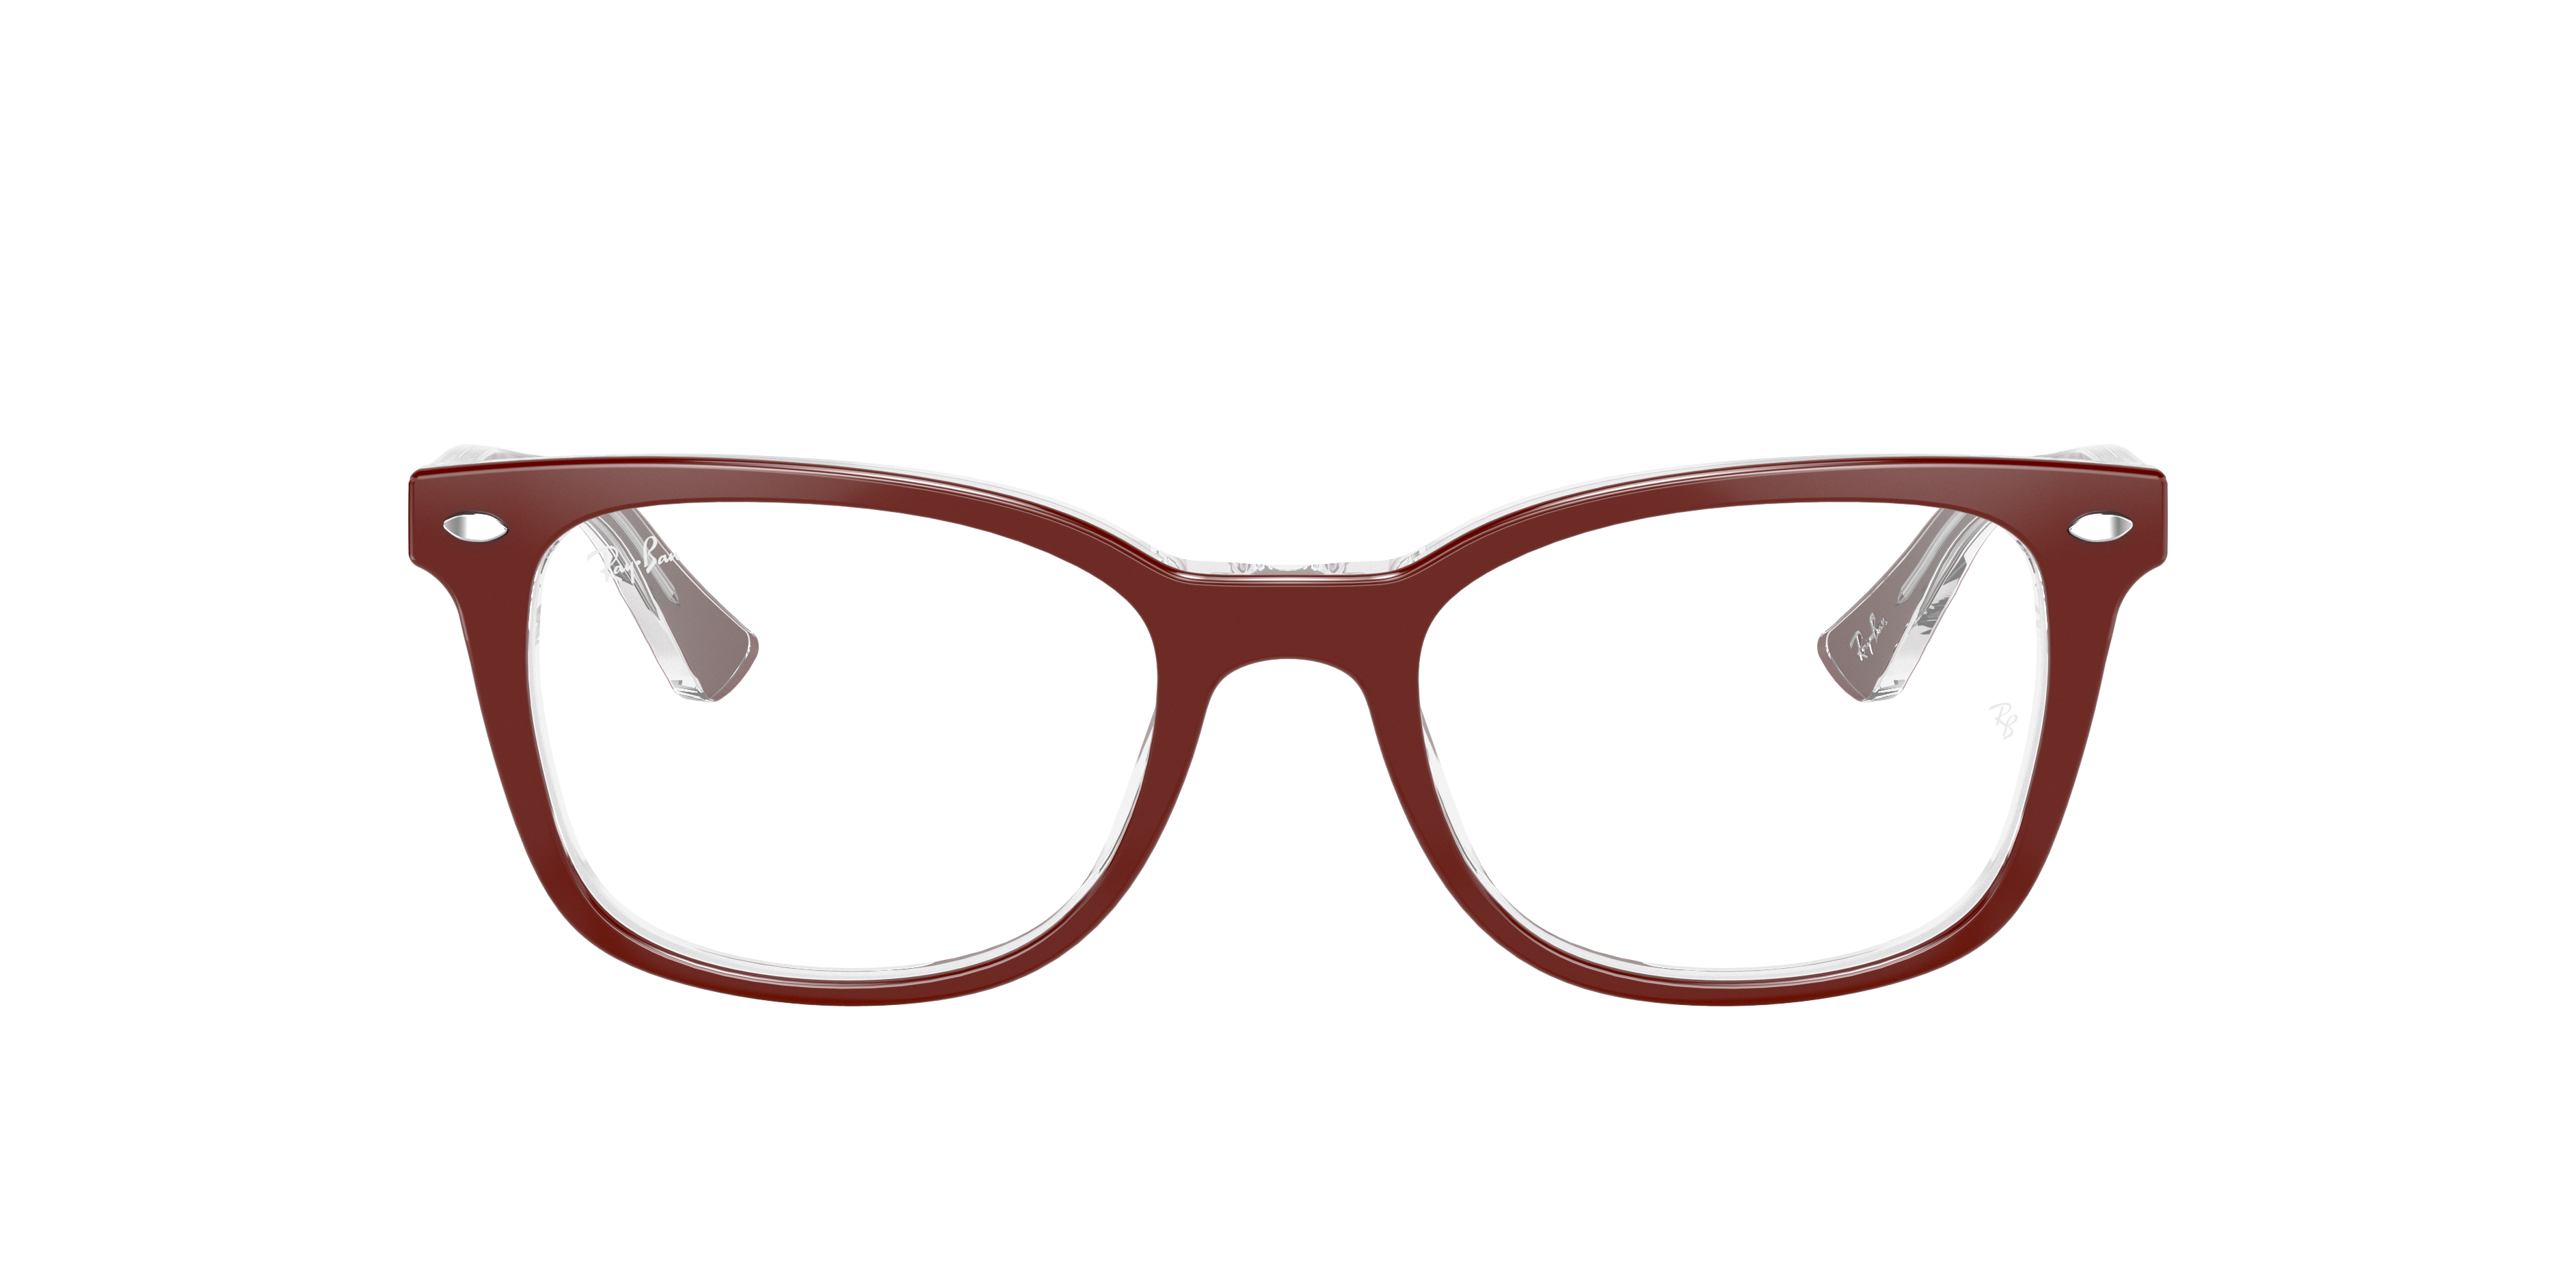 Ray-Ban 0RX5285 Glasses in Red/burgundy 